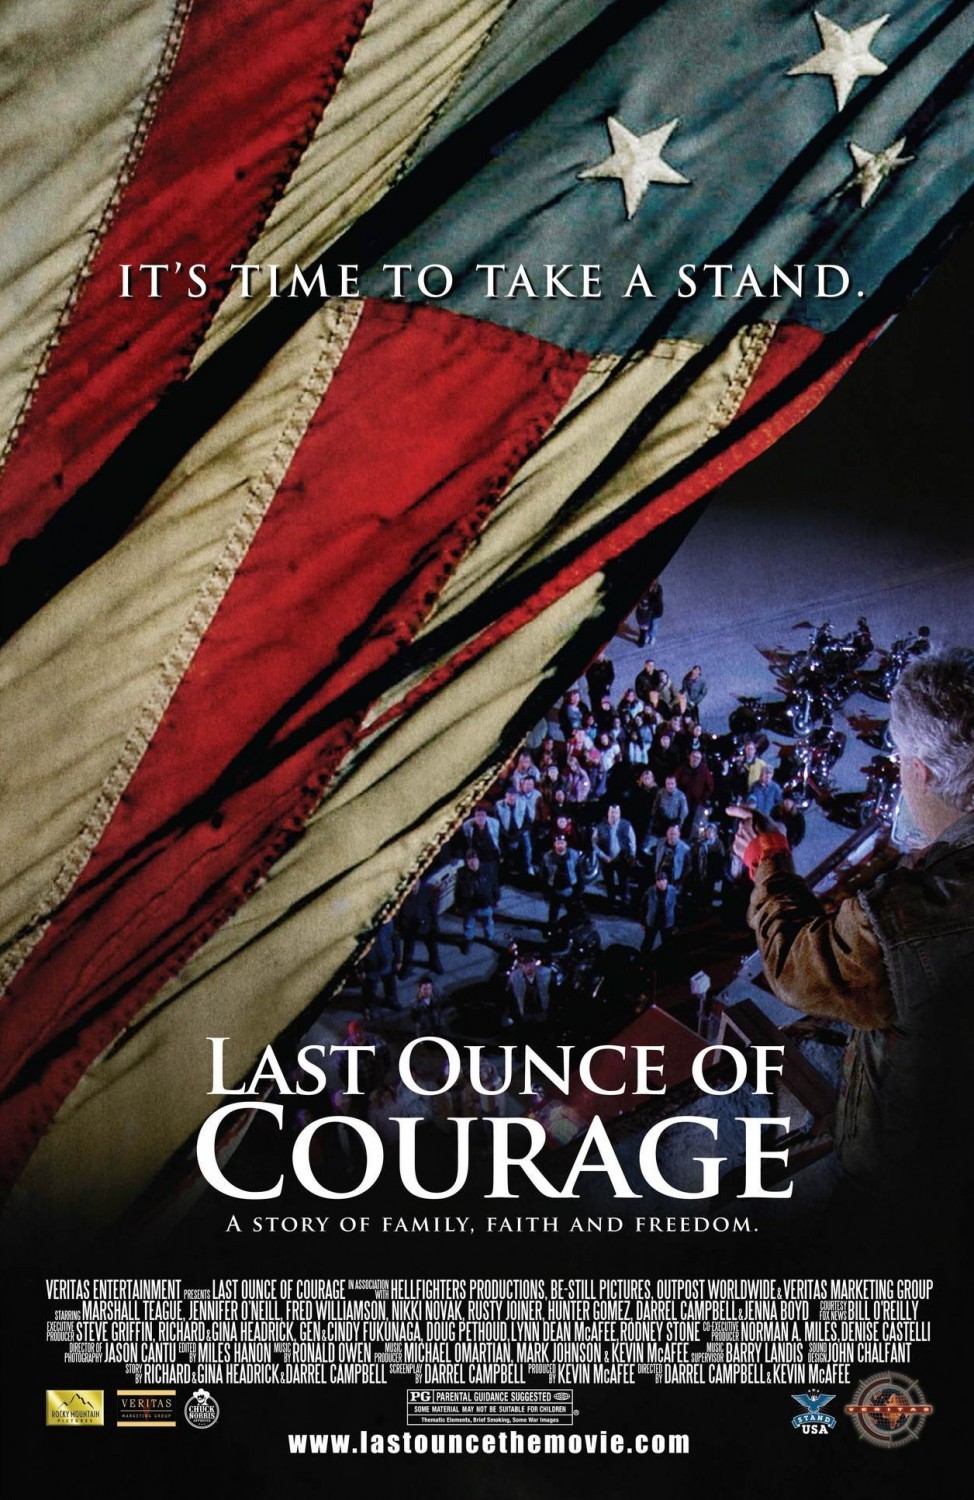 Poster of Rocky Mountain Pictures' Last Ounce of Courage (2012)